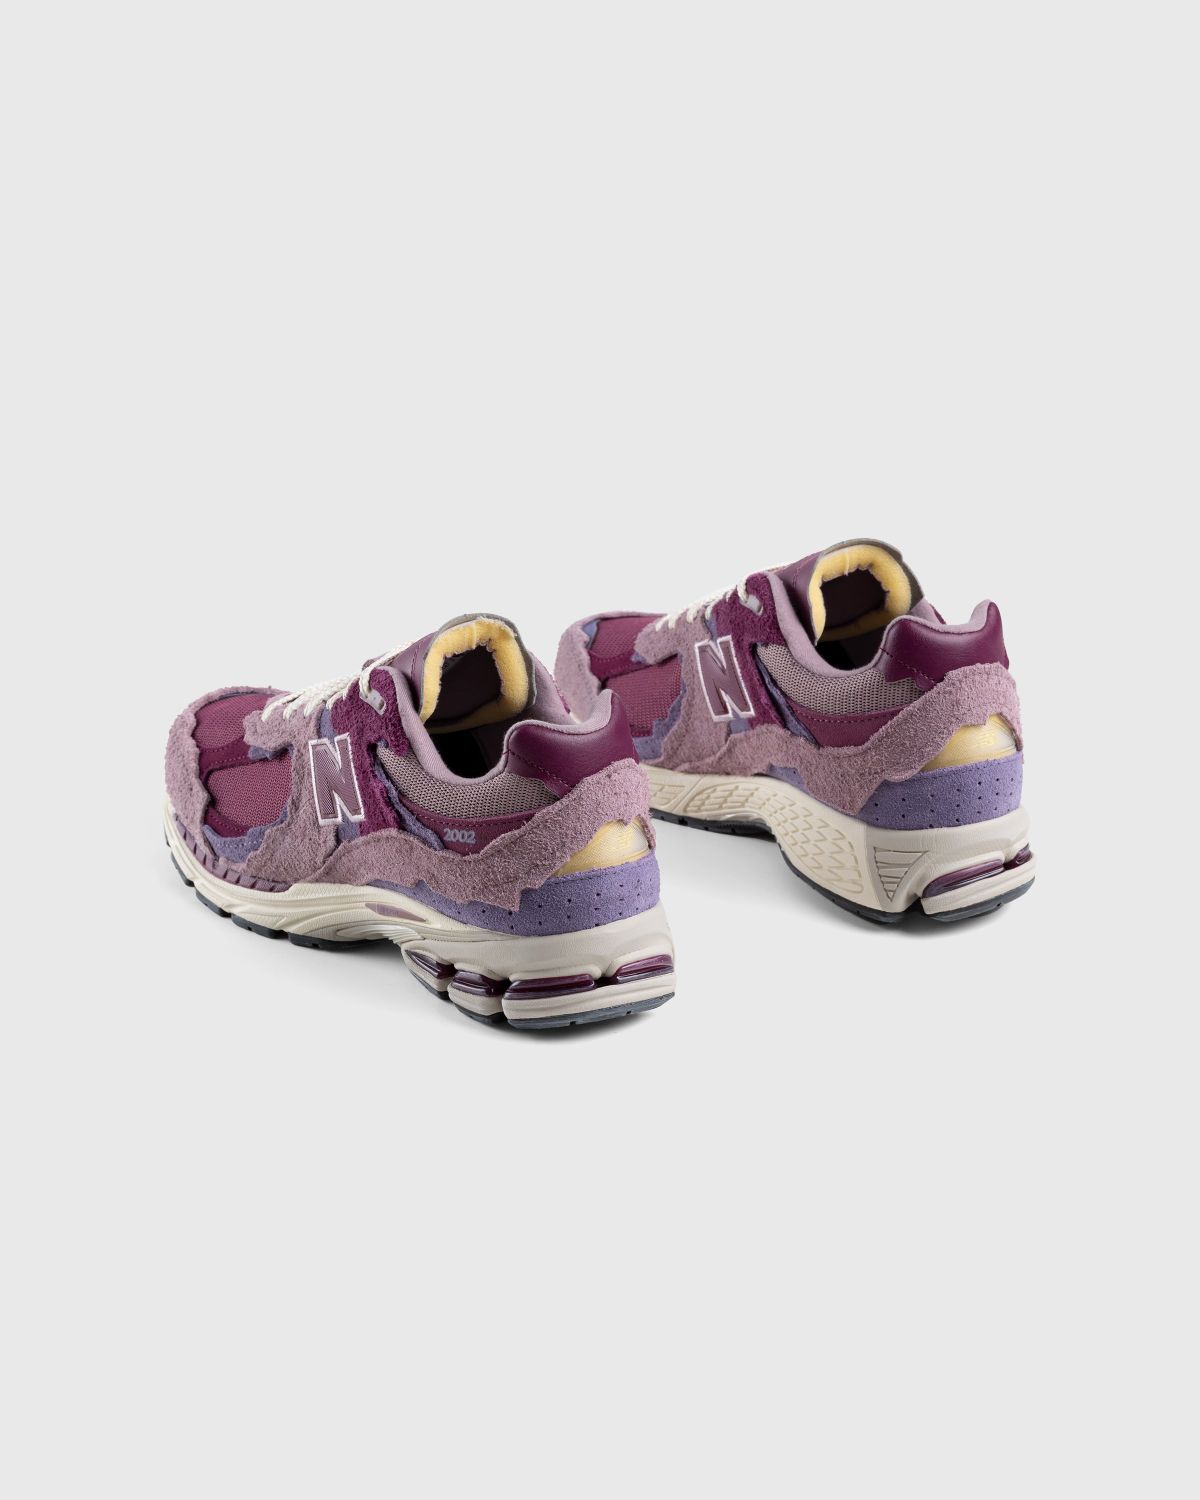 New Balance – M2002RDH Lilac Chalk - Low Top Sneakers - Red - Image 4